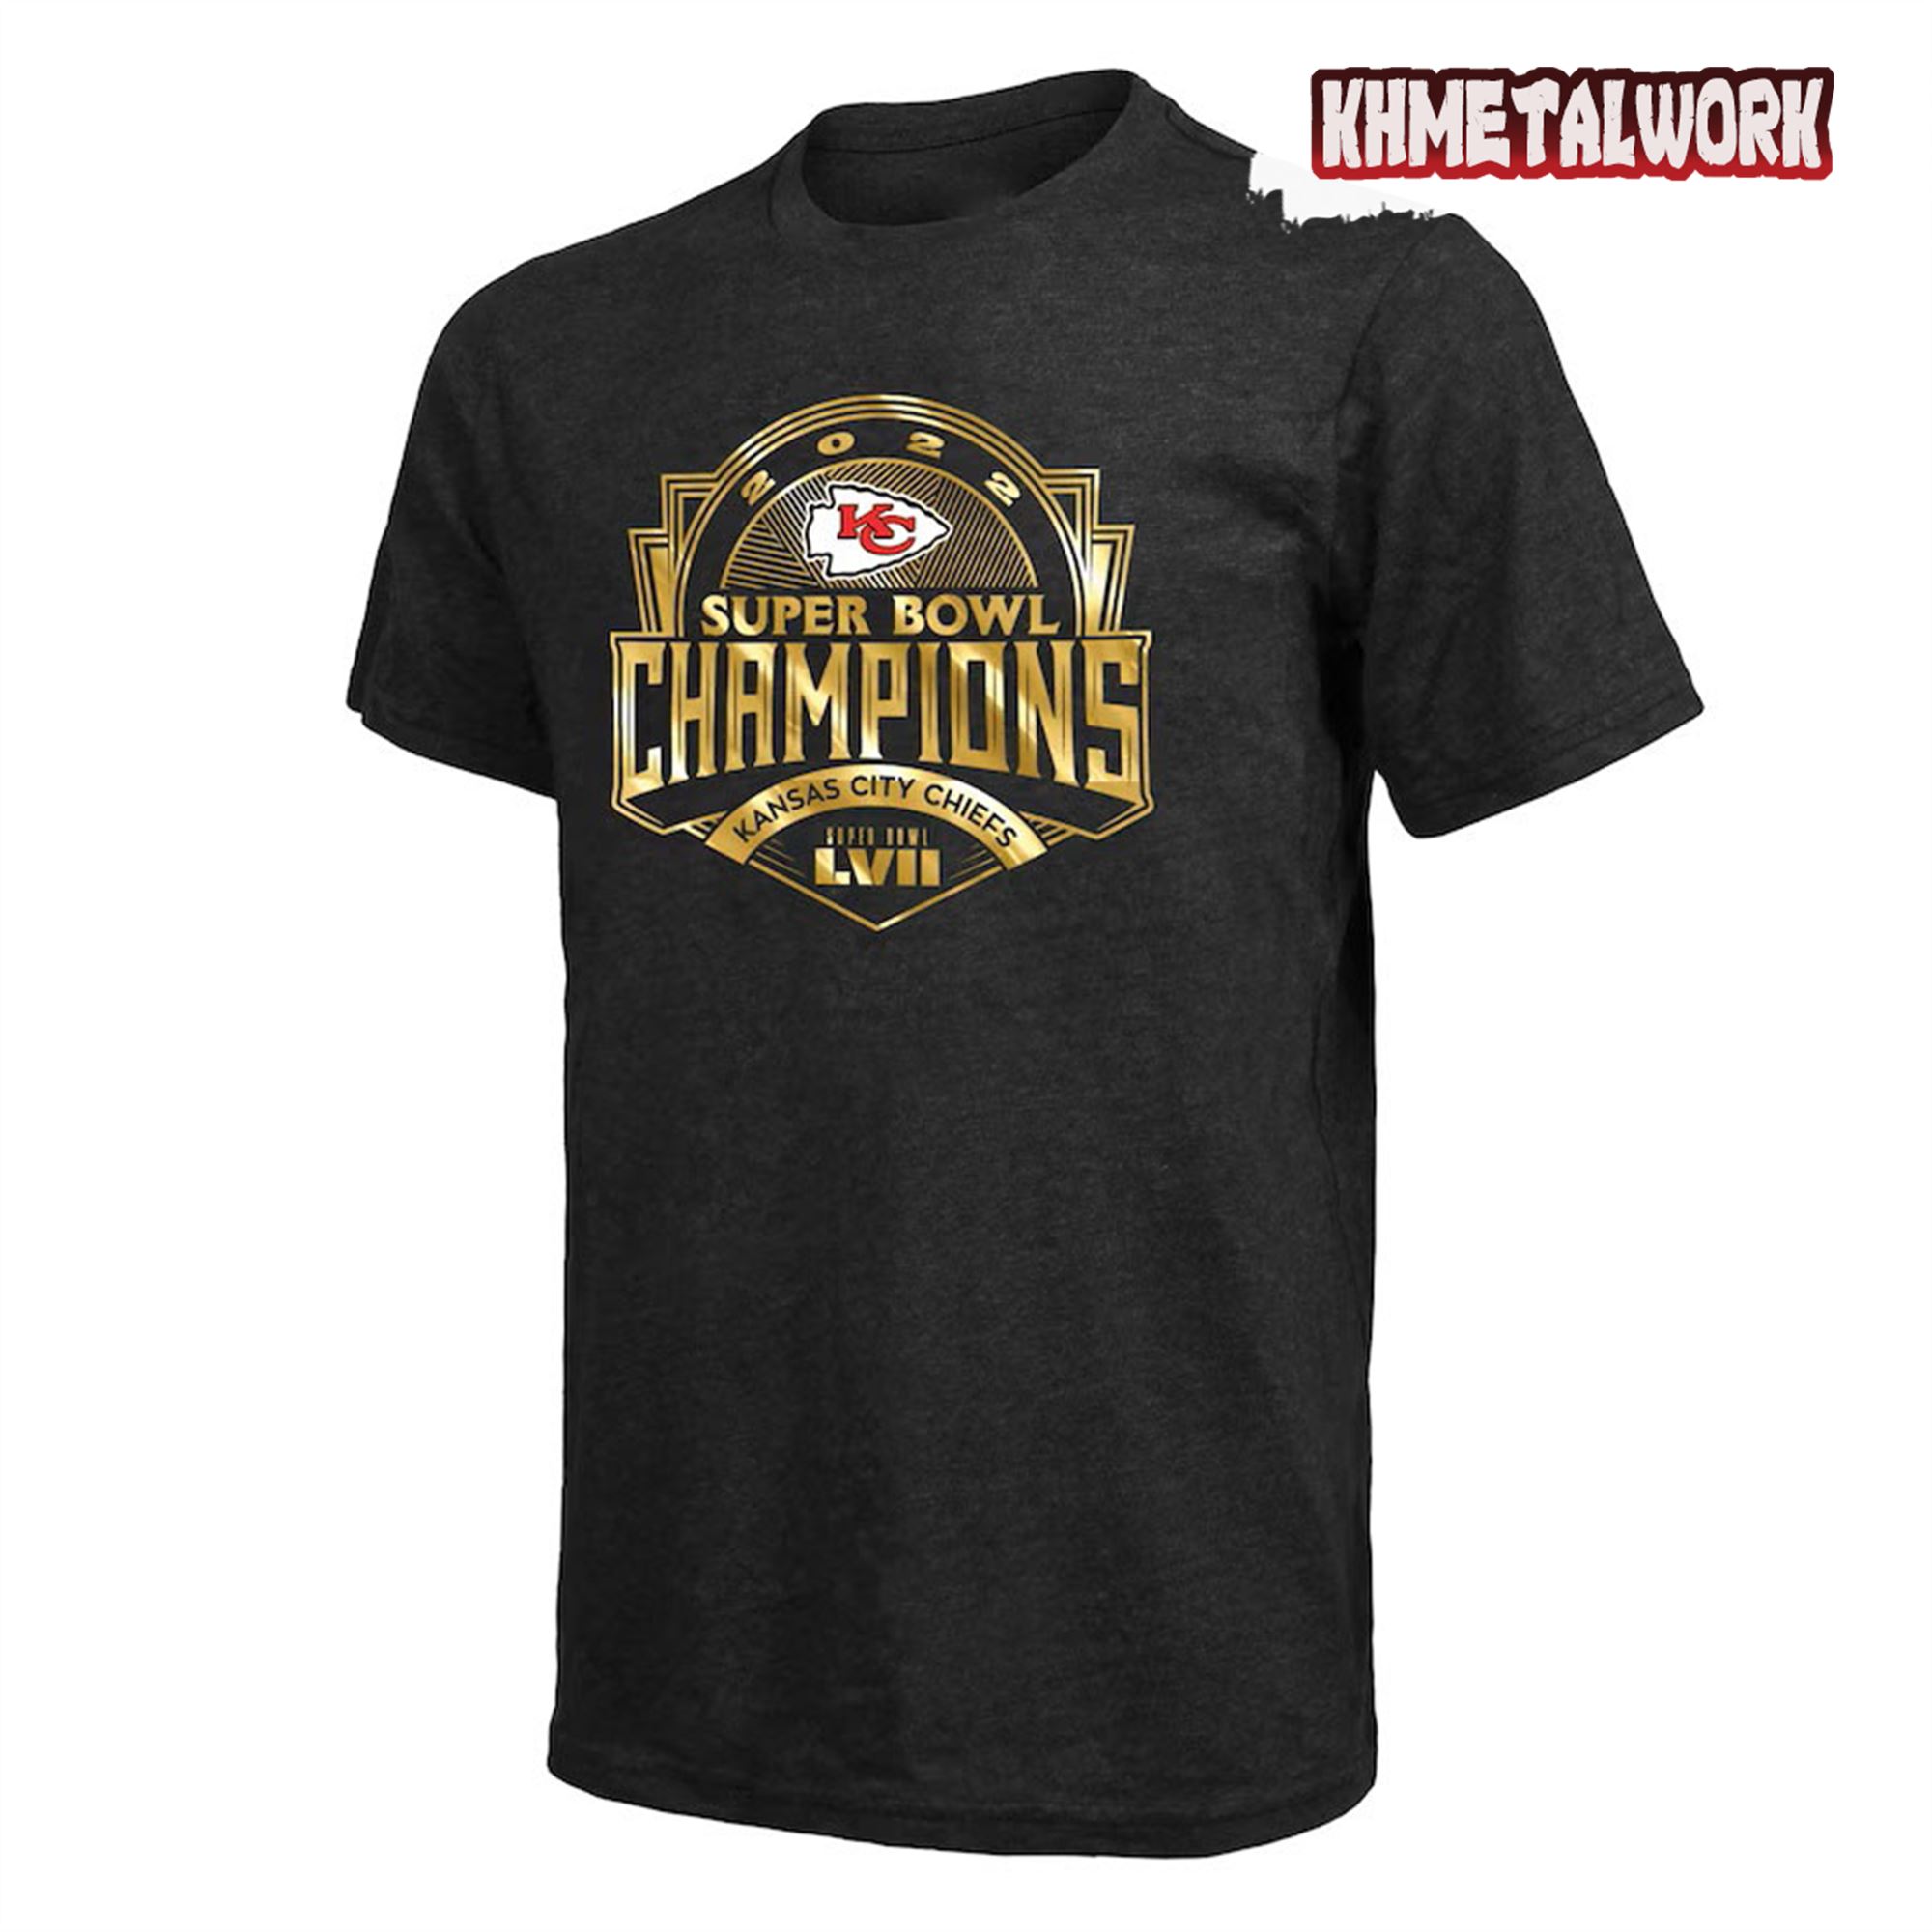 Look Great And Show Your Support For The Chiefs' Super Bowl Lvii Win